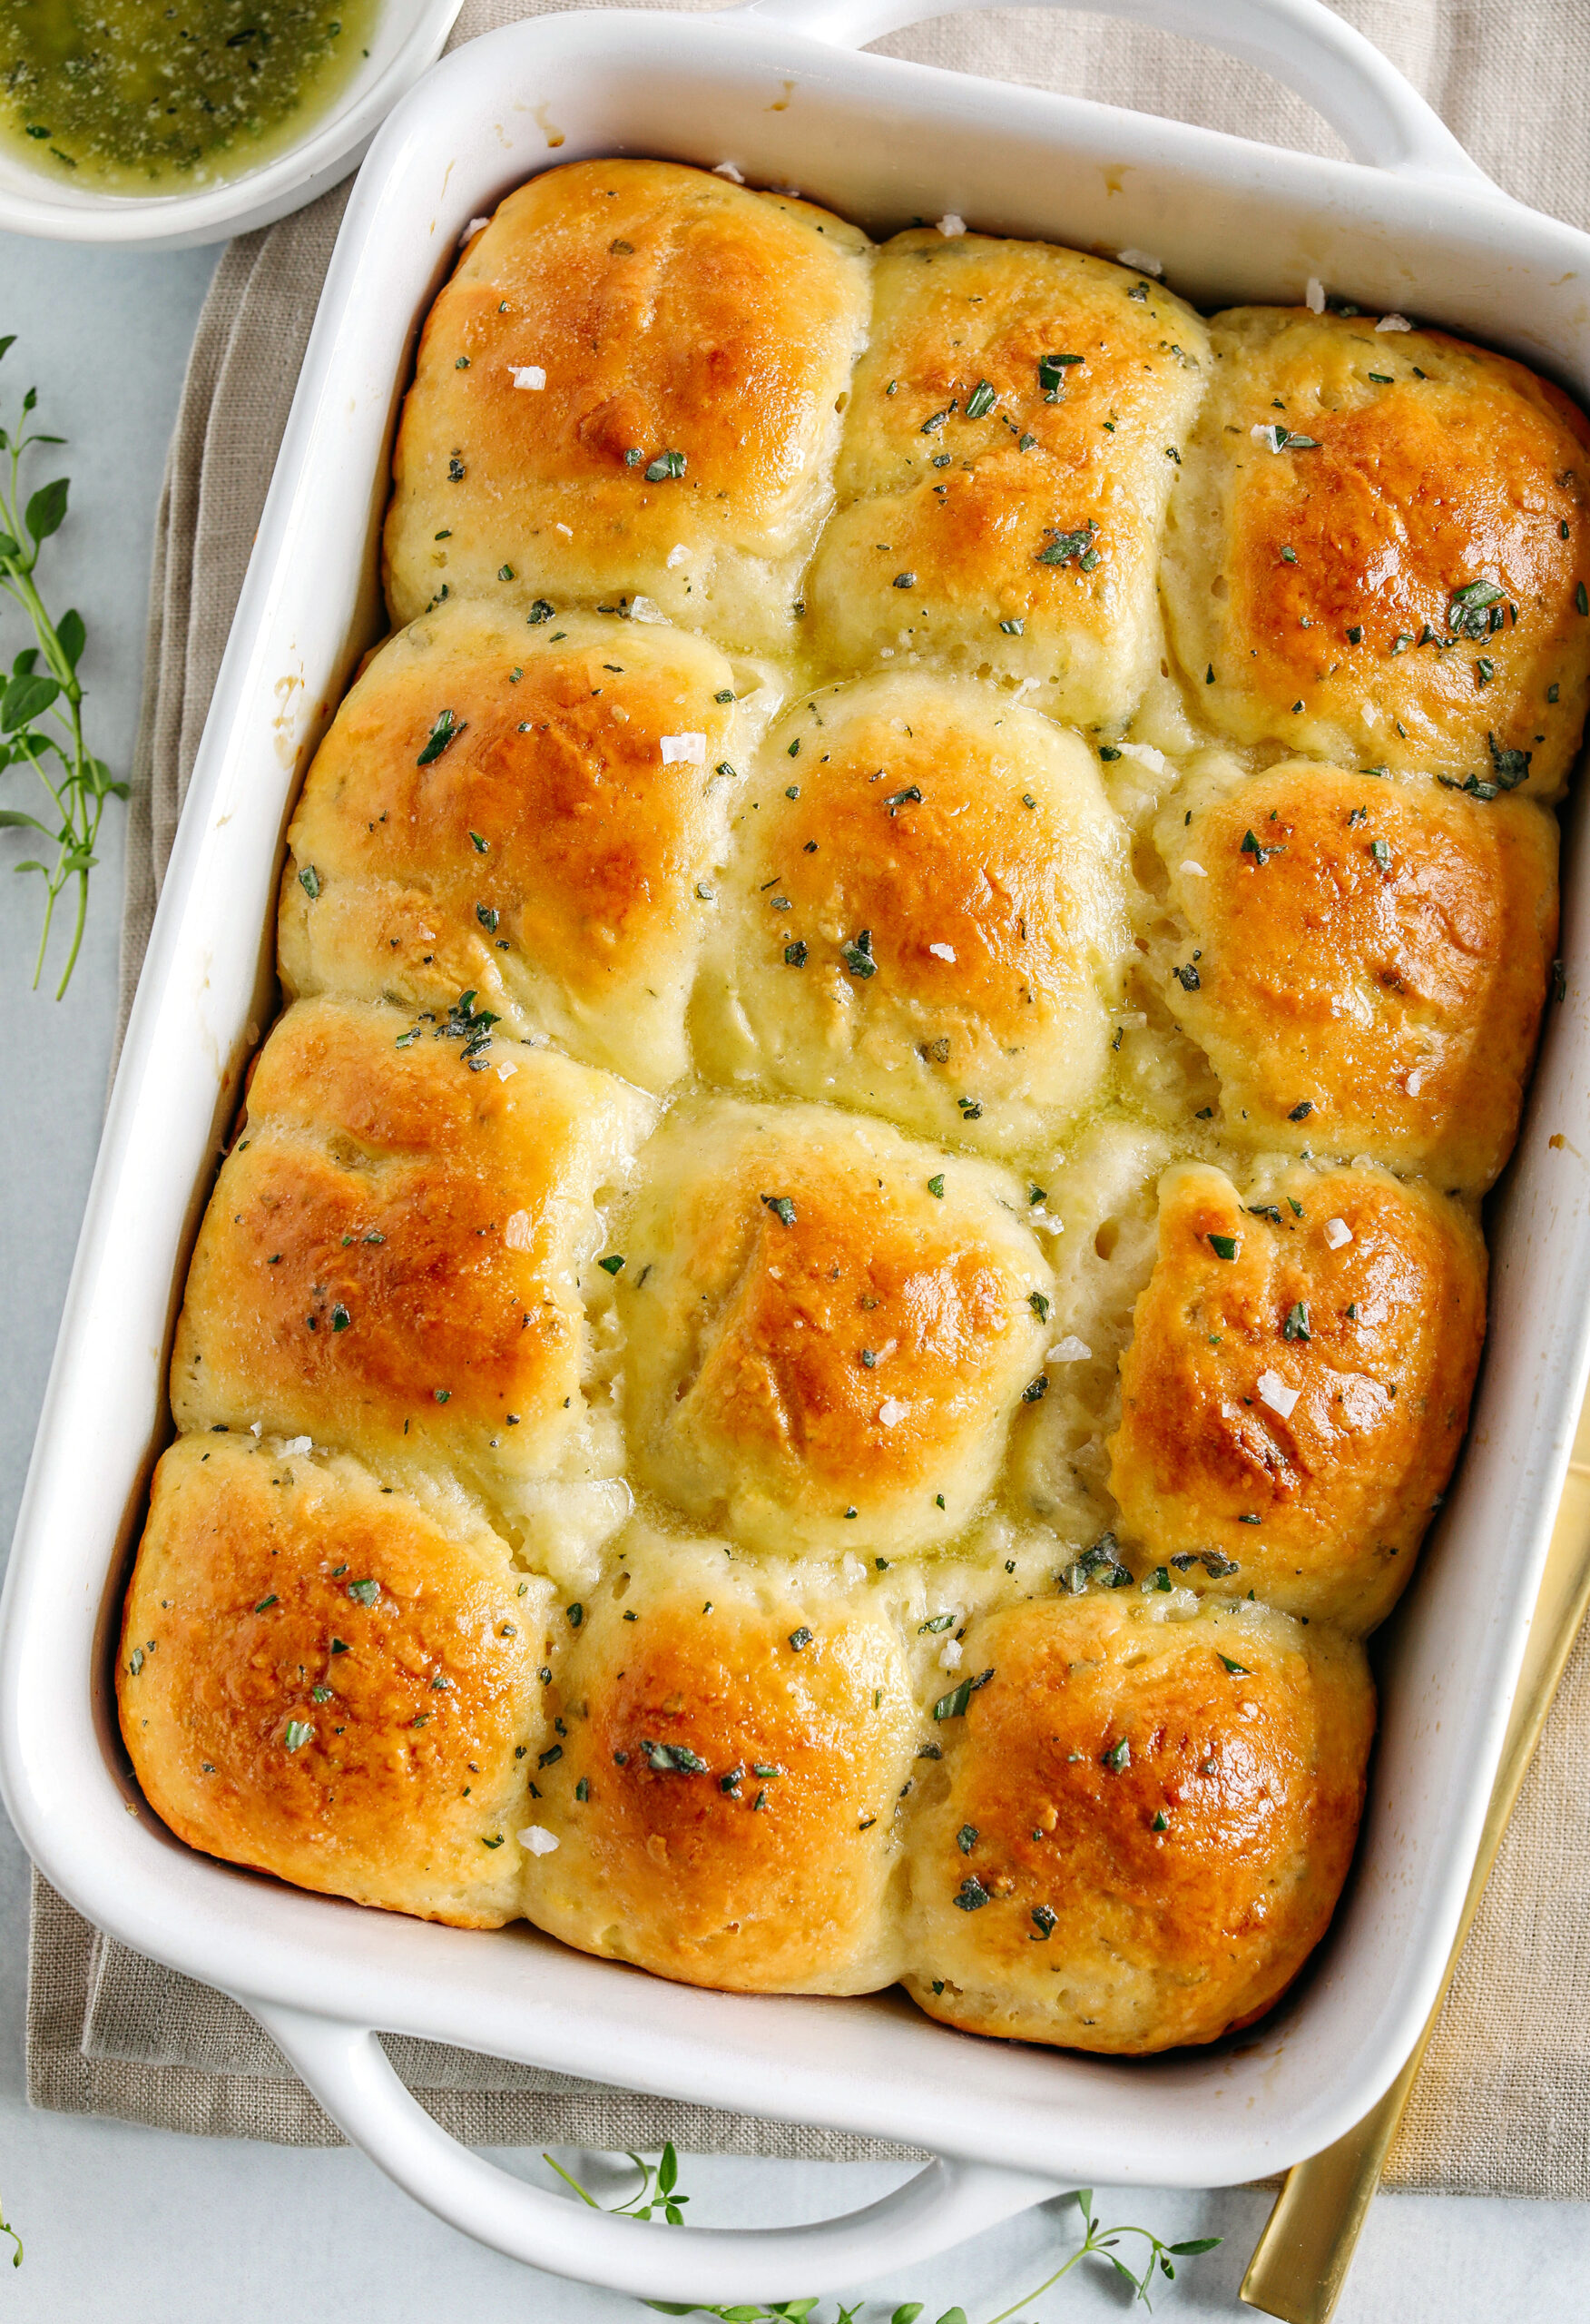 These pull-apart Honey Butter Dinner Rolls are light, fluffy and made without any yeast, eggs or oil.  Infused with honey and fresh herbs, these Parker House-style dinner rolls are perfect for your holiday table this season!